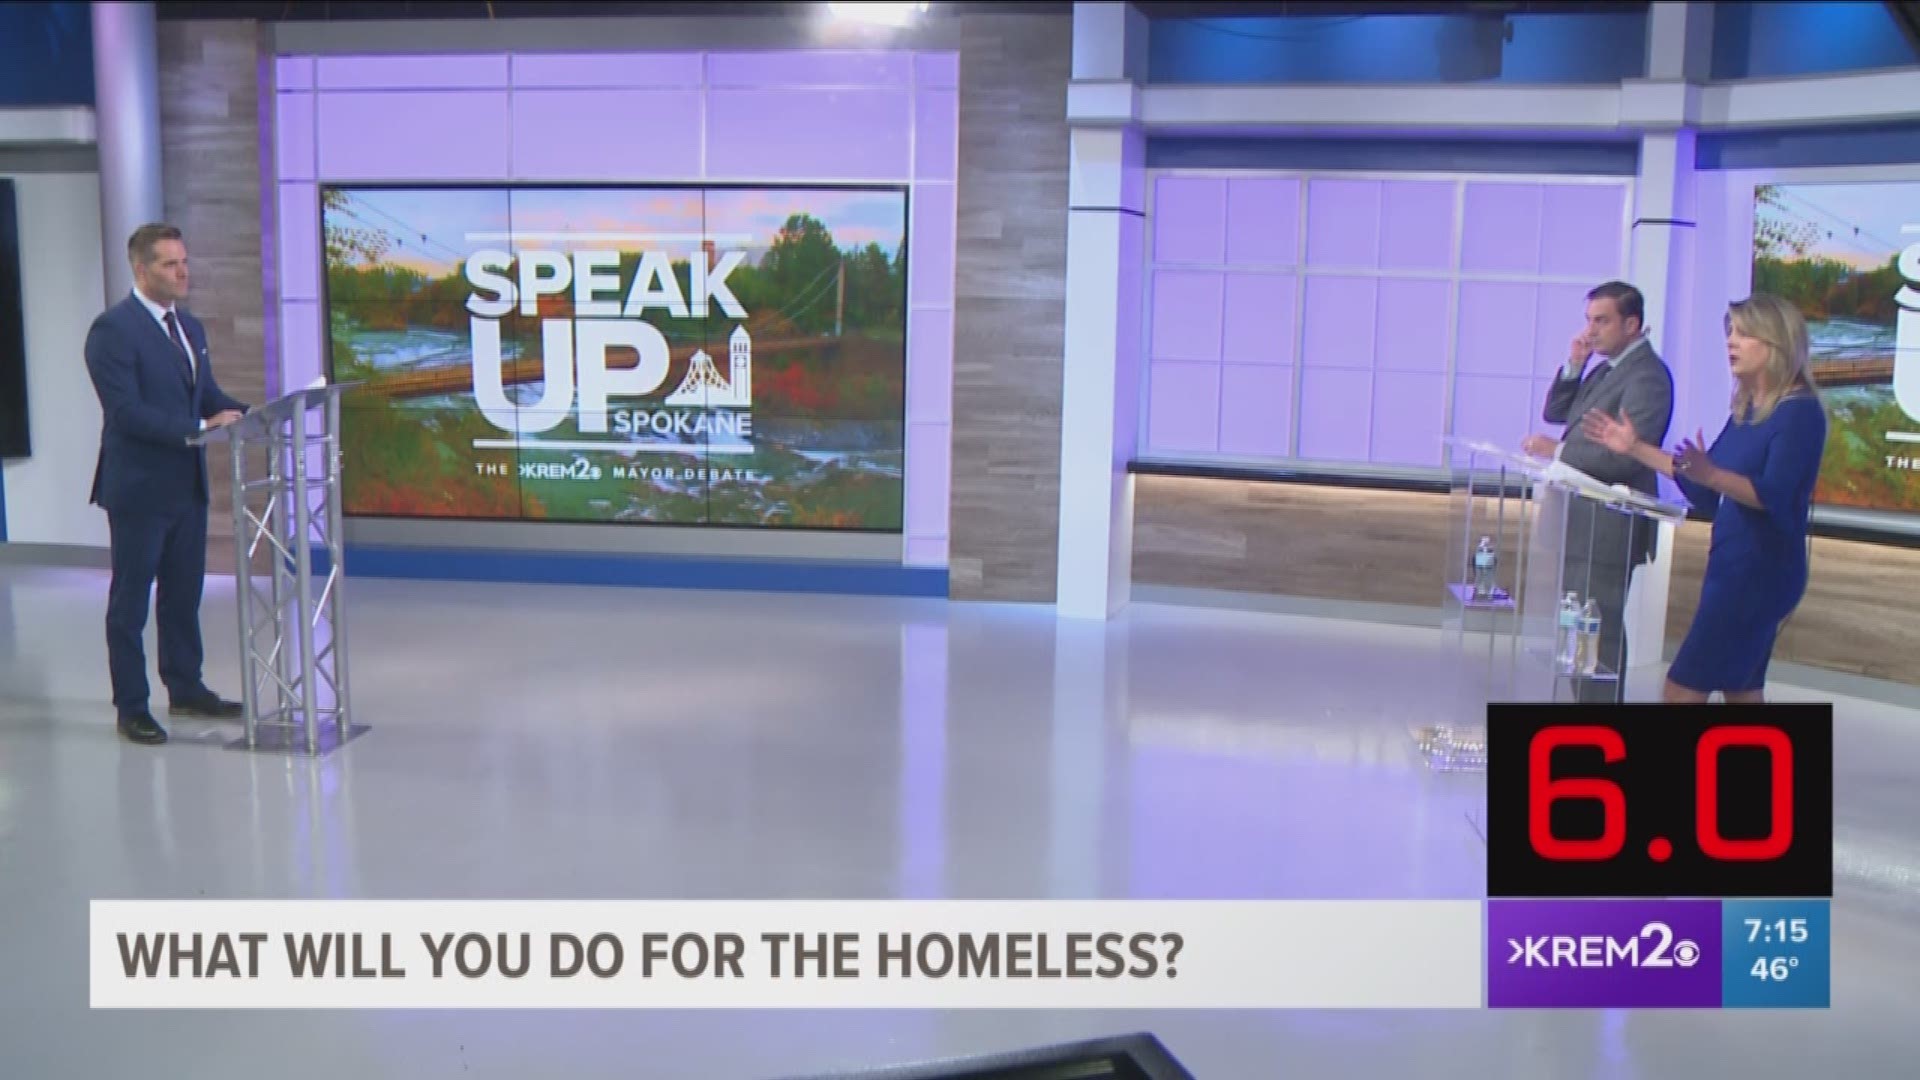 Marcos, a homeless man living in Spokane, asked the candidates what they plan to do to help the homeless.